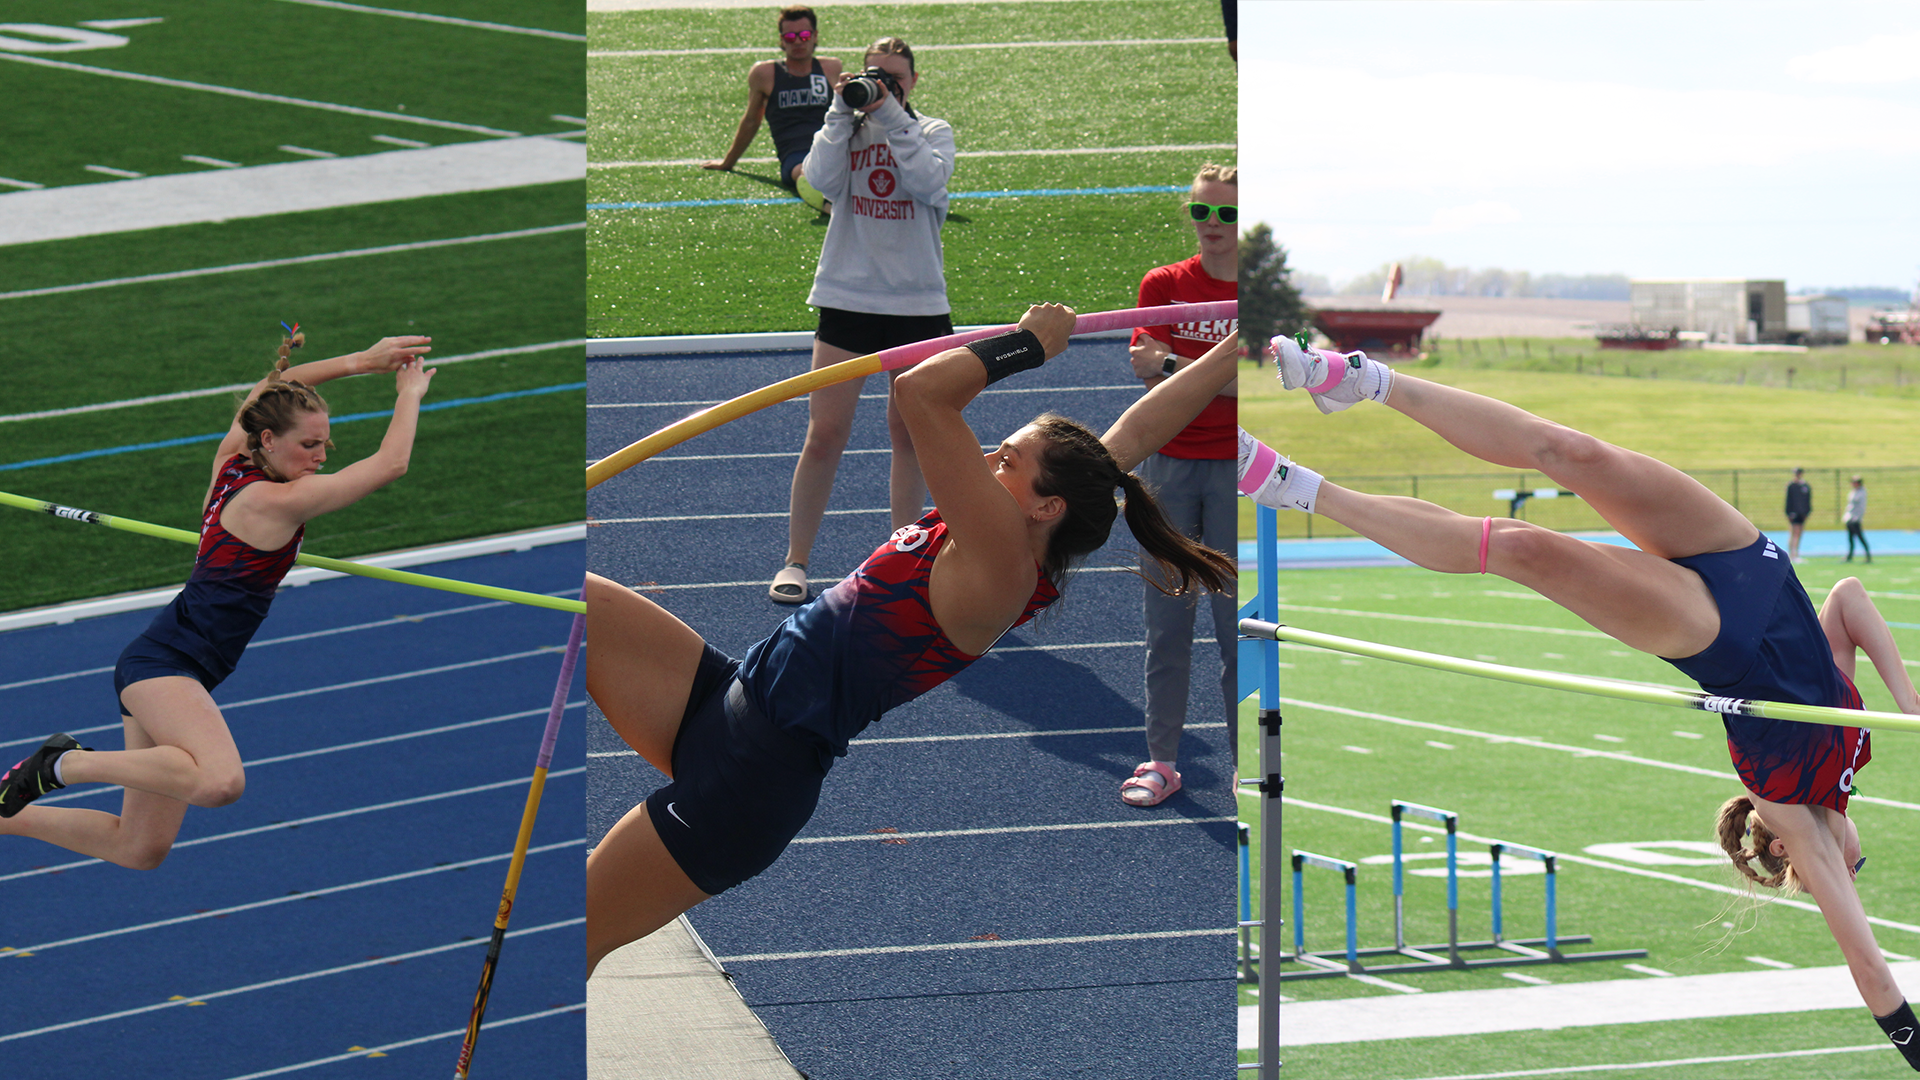 Three Pole Vaulters Set to Compete at Nationals